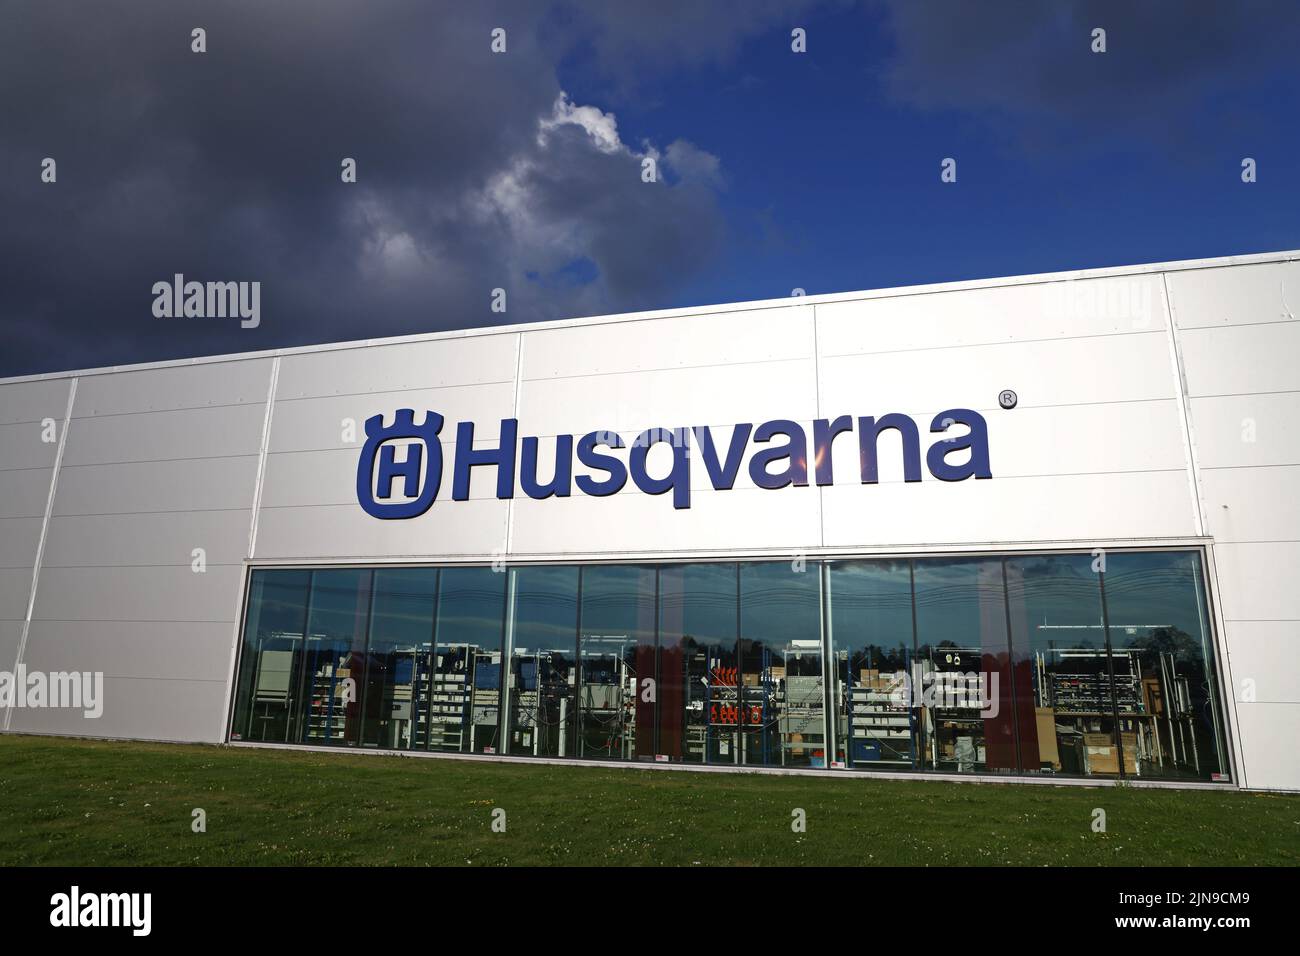 Husqvarna AB Construction Products, Åsbro, Sweden. Husqvarna Construction Products is part of Husqvarna AB and is the market leader in machines and diamond tools for the construction and stone industries. The product range includes cutting machines, drilling machines, diamond tools, floor, bench, wall and wire saws as well as machines for surface treatment and demolition. Stock Photo